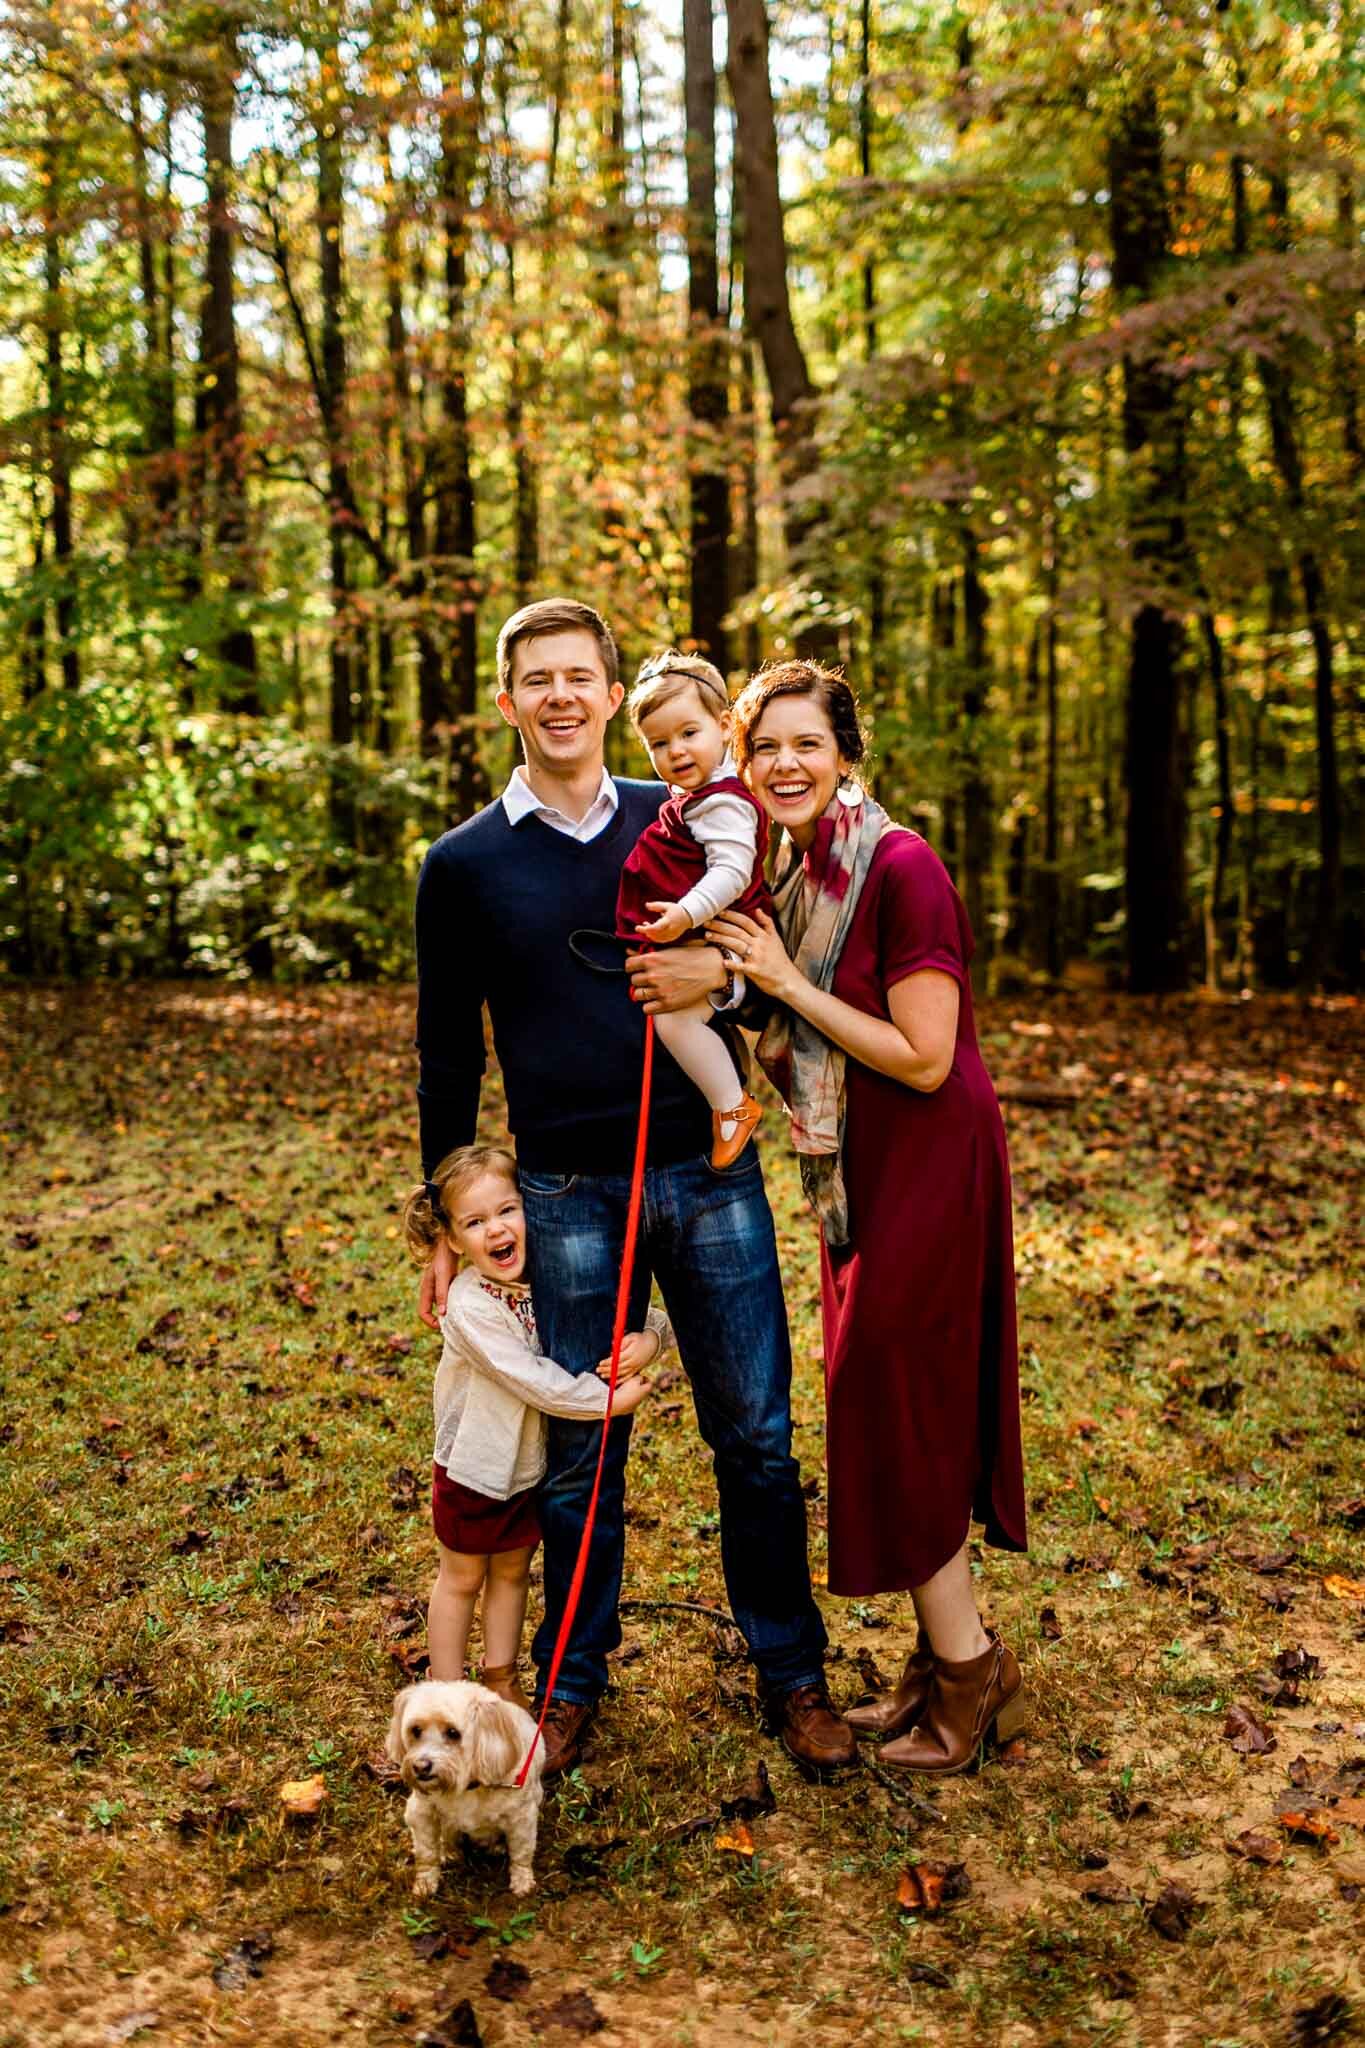 Raleigh Family Photographer | By G. Lin Photography | Umstead Park | Fall candid family photo outdoors